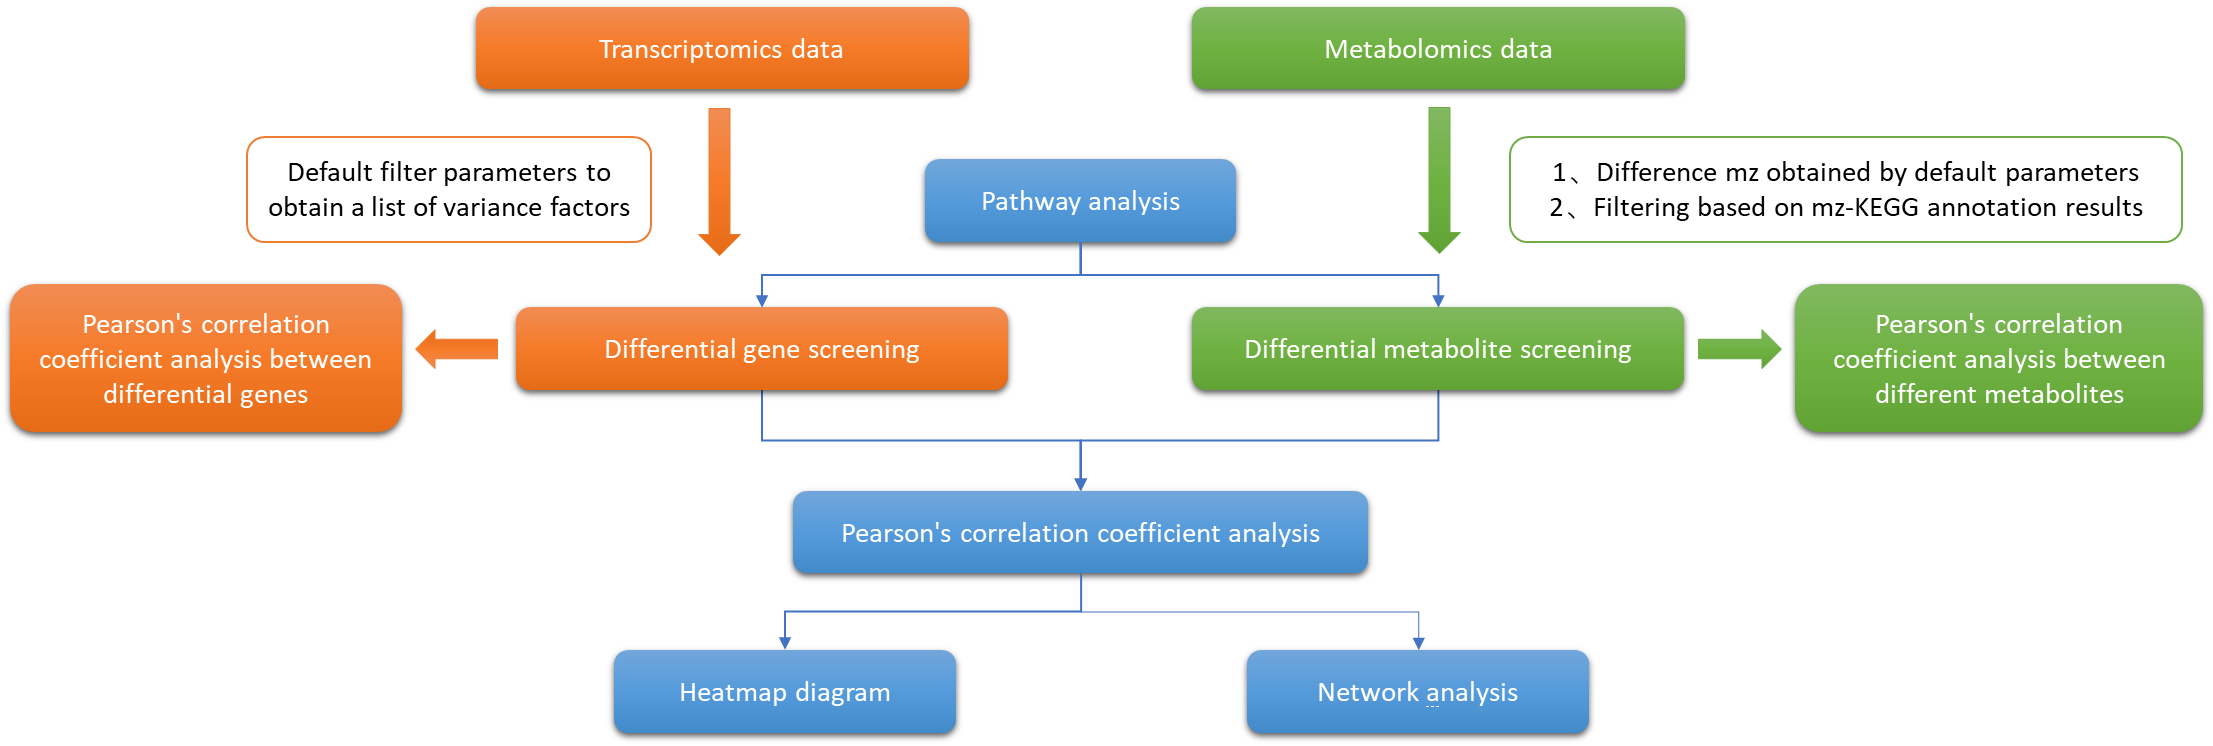 Technology Roadmap for Integrative Metabolome and Transcriptome